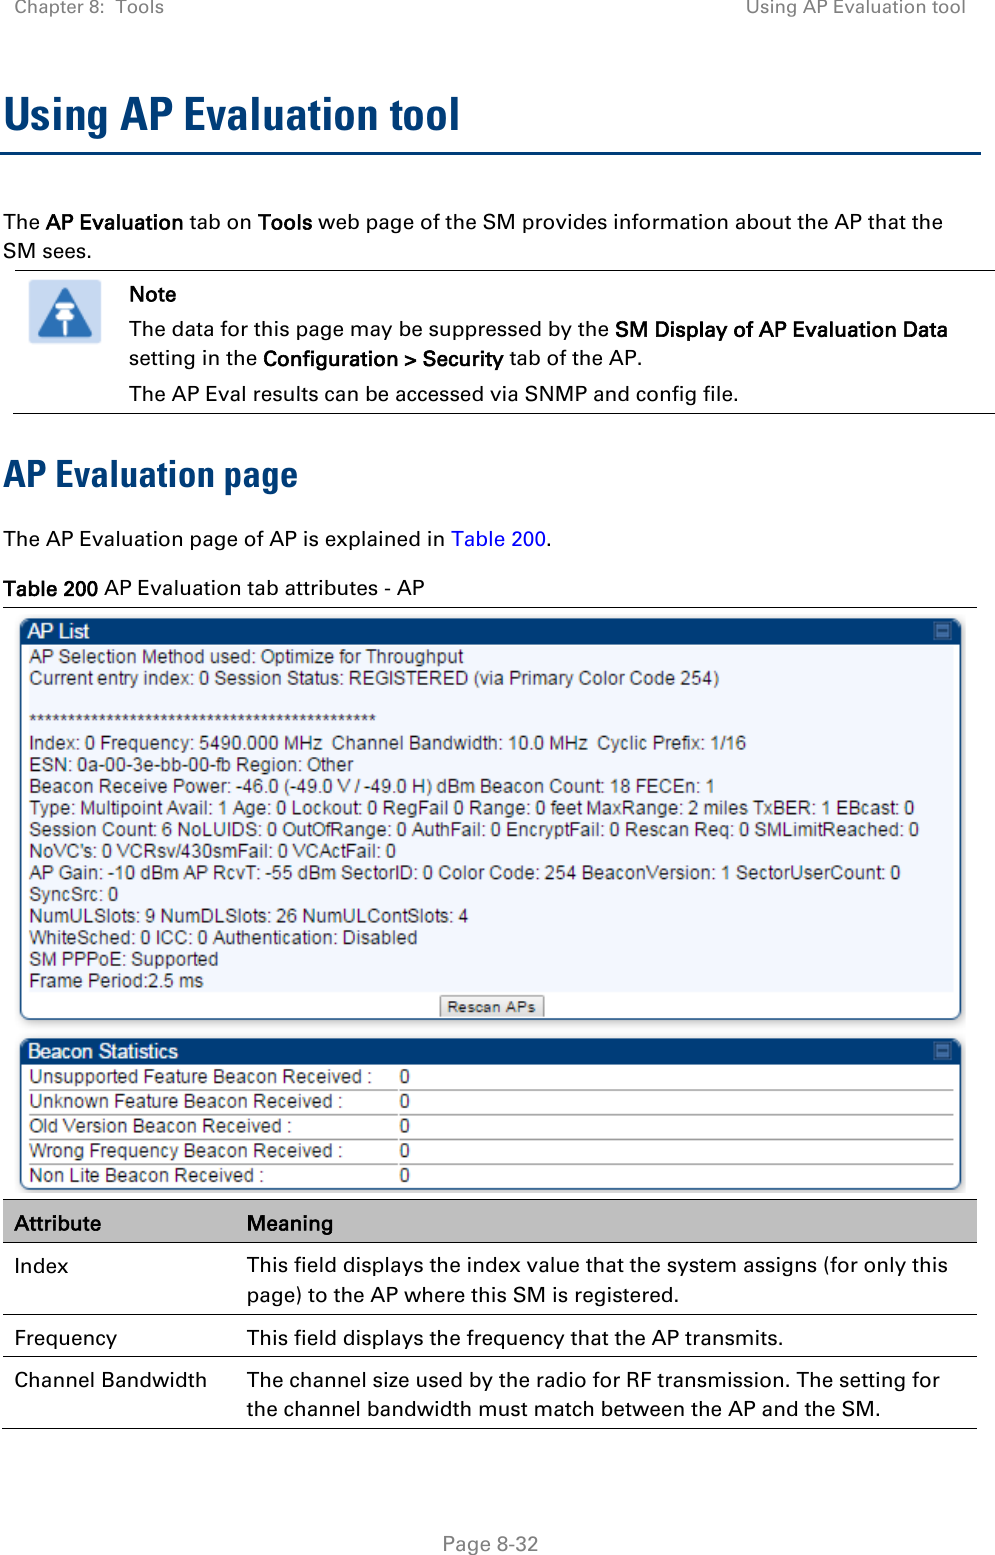 Chapter 8:  Tools Using AP Evaluation tool   Page 8-32 Using AP Evaluation tool The AP Evaluation tab on Tools web page of the SM provides information about the AP that the SM sees.   Note The data for this page may be suppressed by the SM Display of AP Evaluation Data setting in the Configuration &gt; Security tab of the AP. The AP Eval results can be accessed via SNMP and config file. AP Evaluation page  The AP Evaluation page of AP is explained in Table 200. Table 200 AP Evaluation tab attributes - AP  Attribute Meaning Index  This field displays the index value that the system assigns (for only this page) to the AP where this SM is registered. Frequency  This field displays the frequency that the AP transmits. Channel Bandwidth The channel size used by the radio for RF transmission. The setting for the channel bandwidth must match between the AP and the SM.  